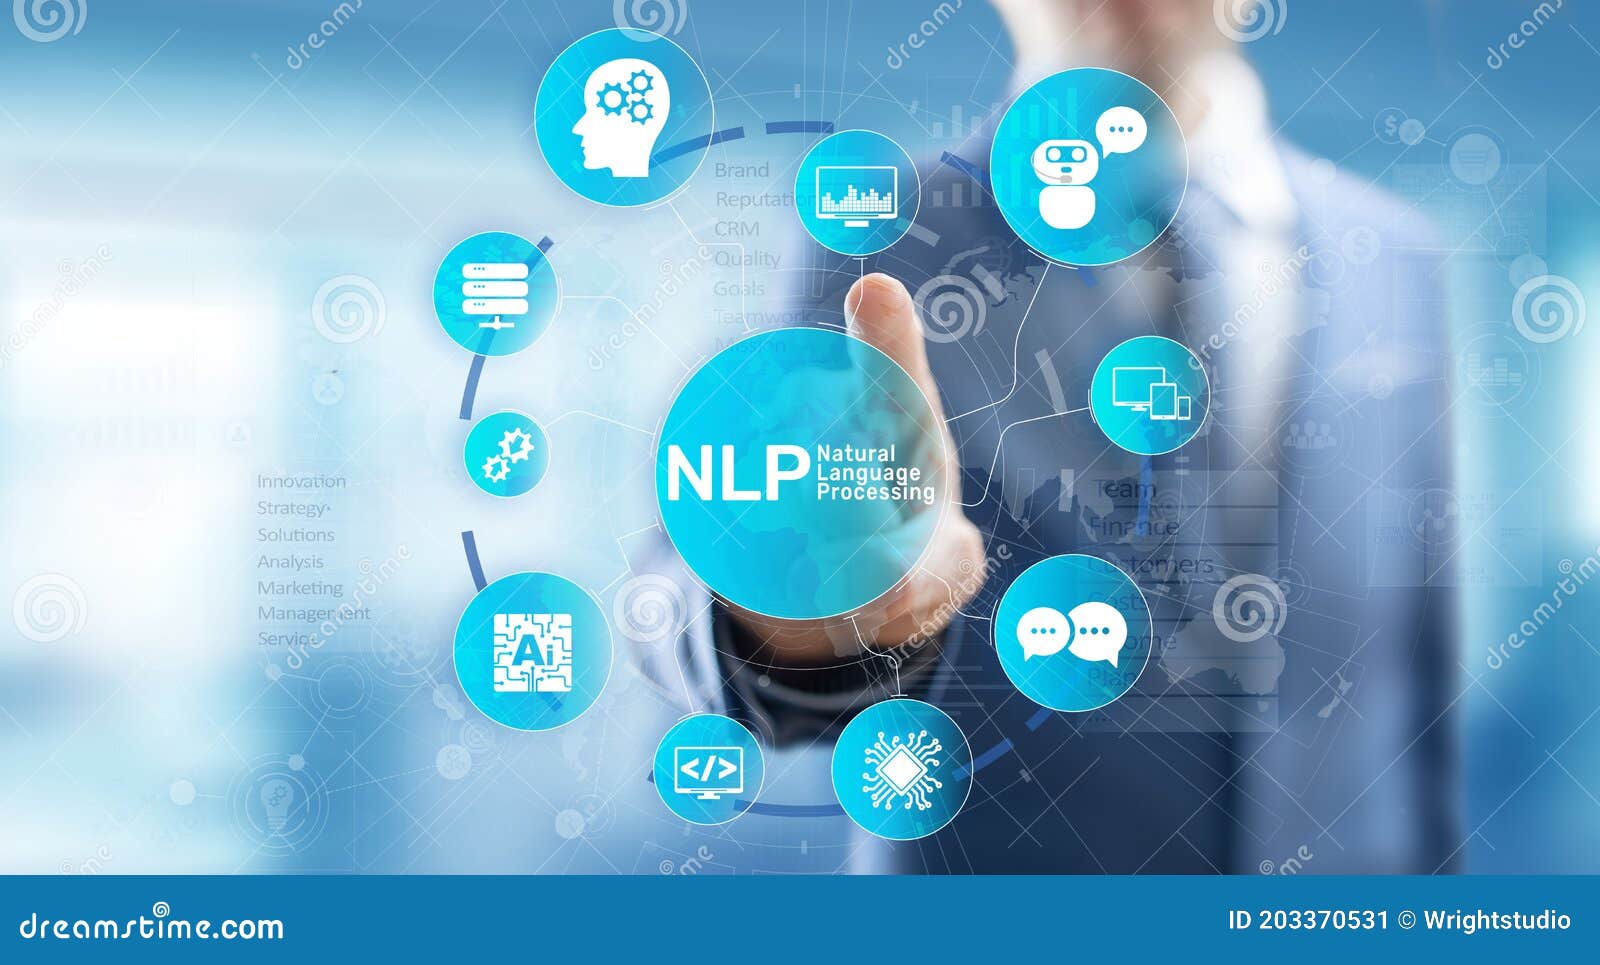 nlp natural language processing cognitive computing technology concept on virtual screen.